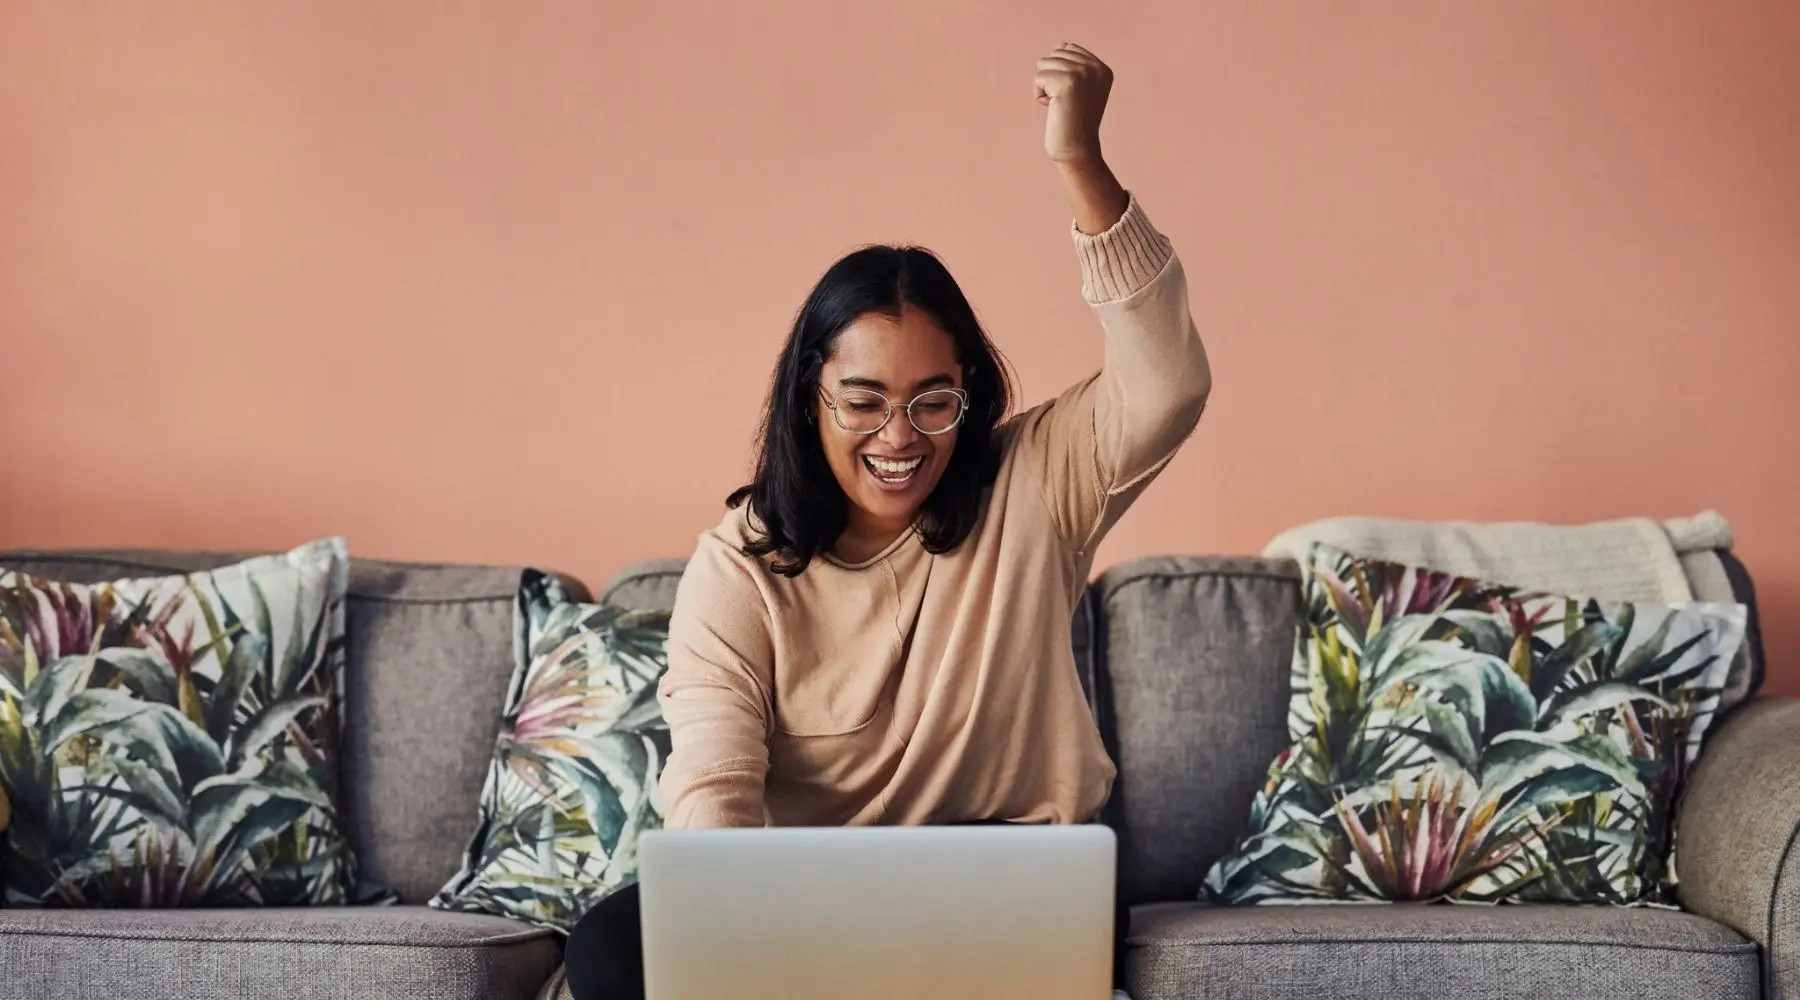 A woman celebrates a victory on her laptop.